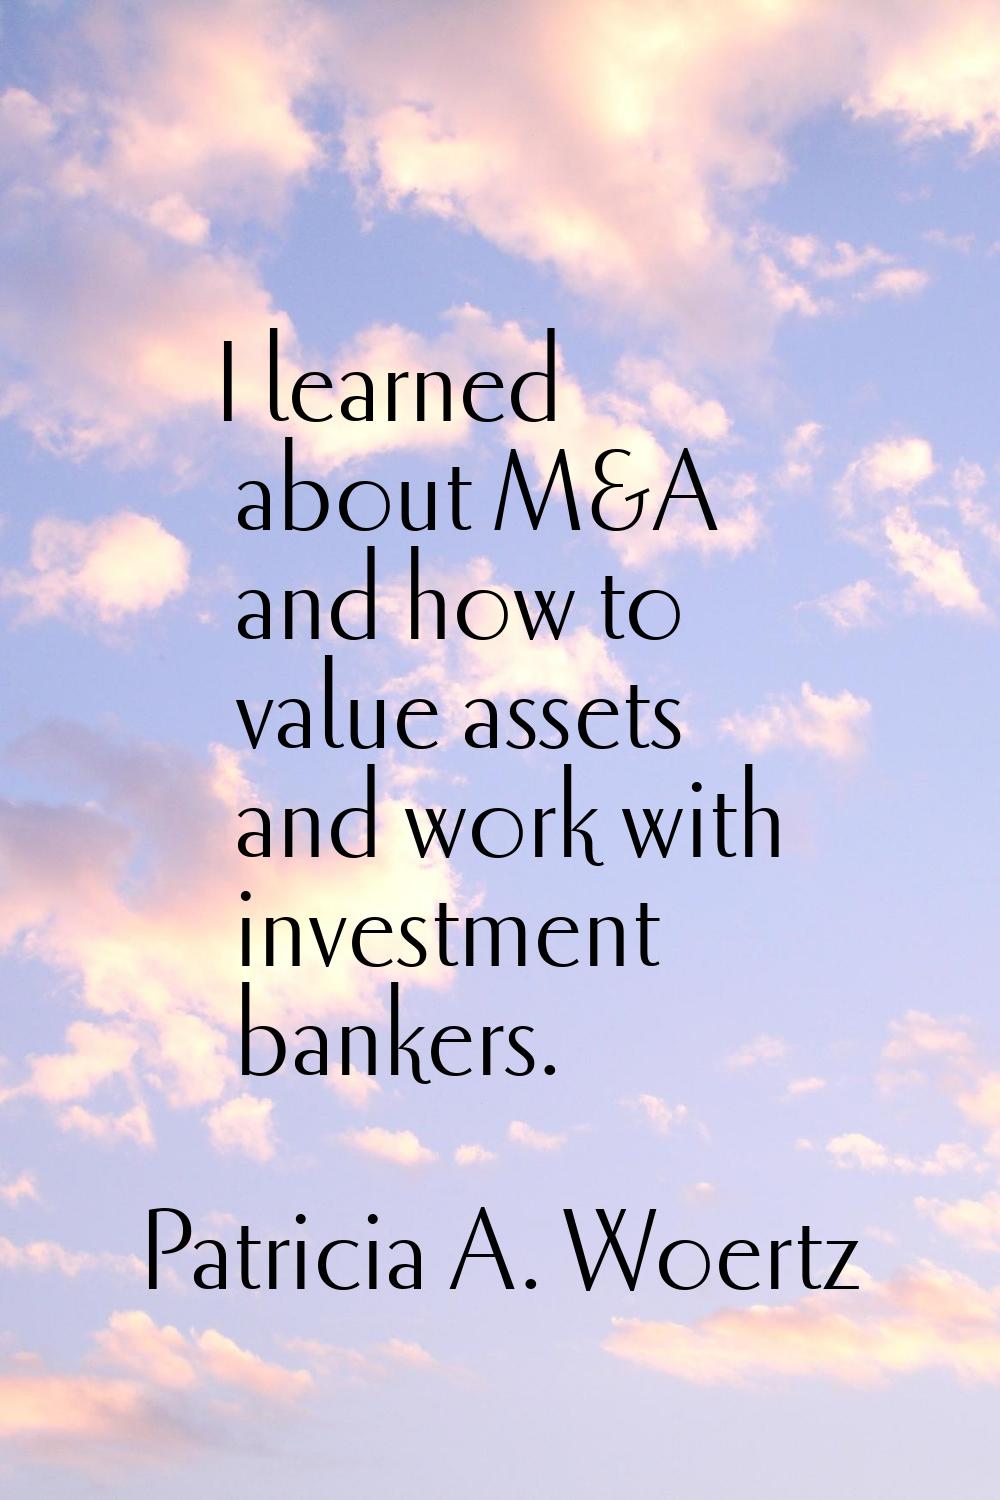 I learned about M&A and how to value assets and work with investment bankers.